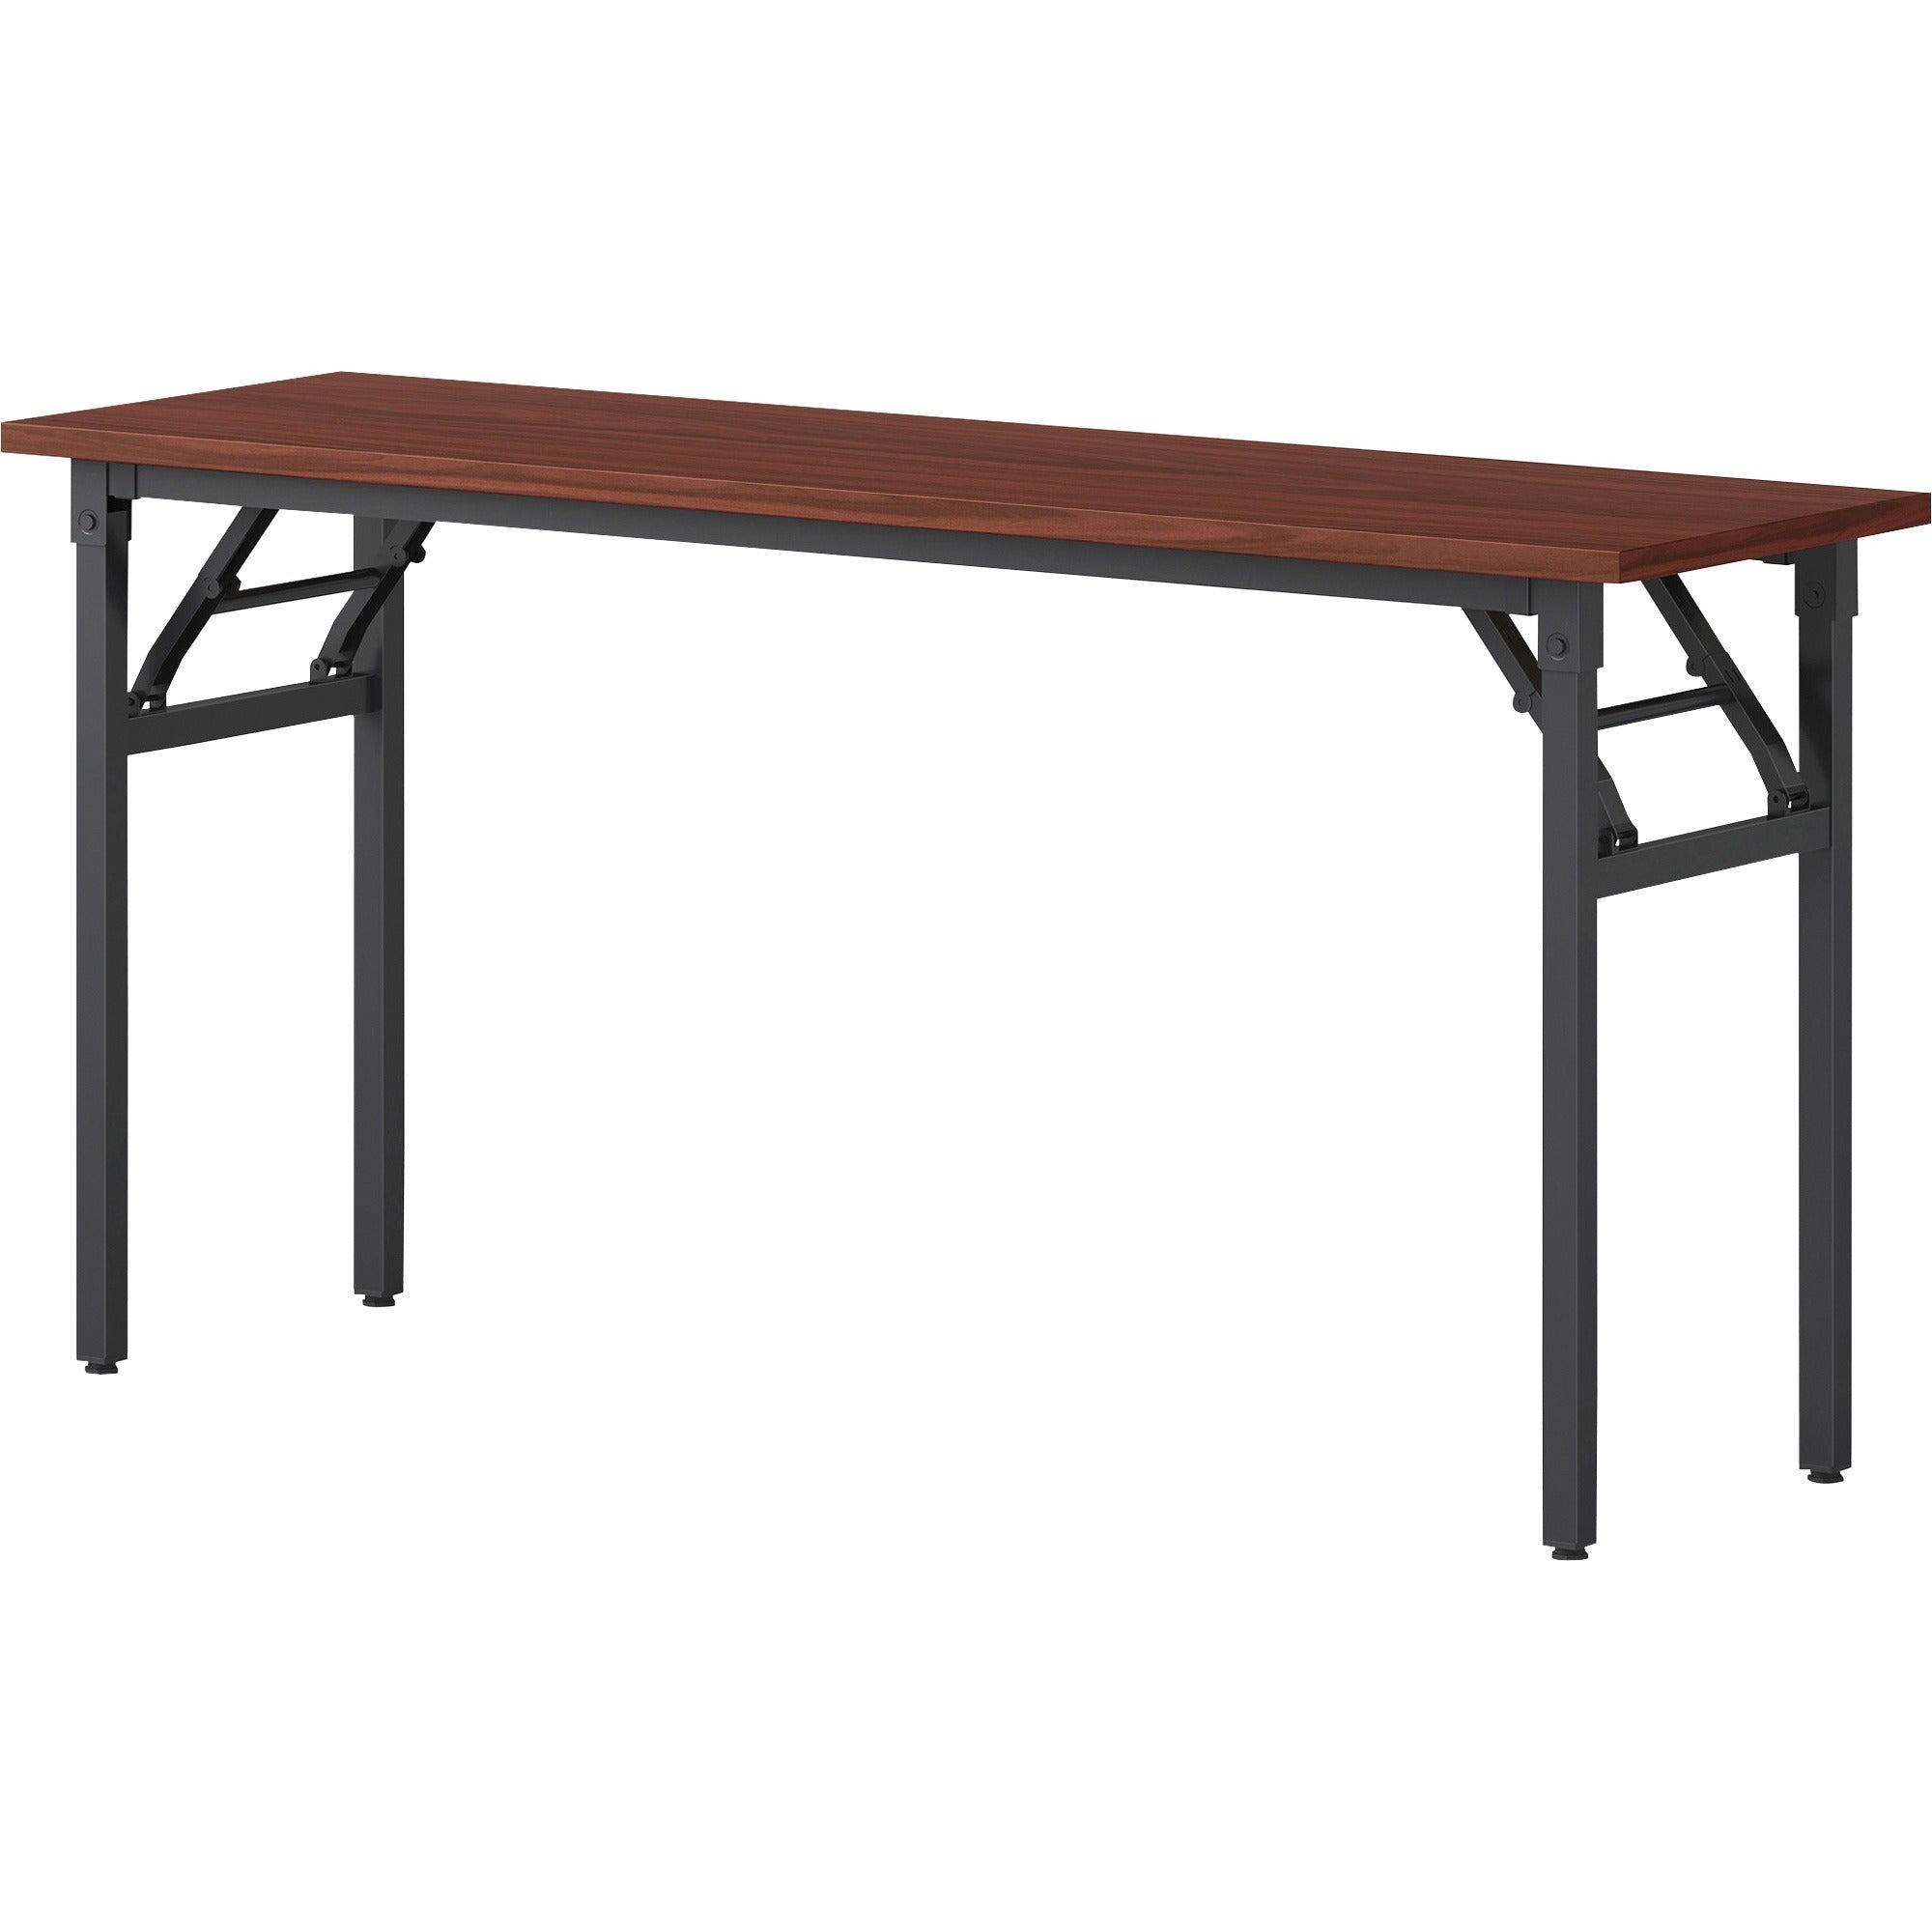 lorell-folding-training-table-for-table-topmelamine-top-x-60-table-top-width-x-18-table-top-depth-x-1-table-top-thickness-30-height-assembly-required-mahogany-1-each_llr60747 - 4